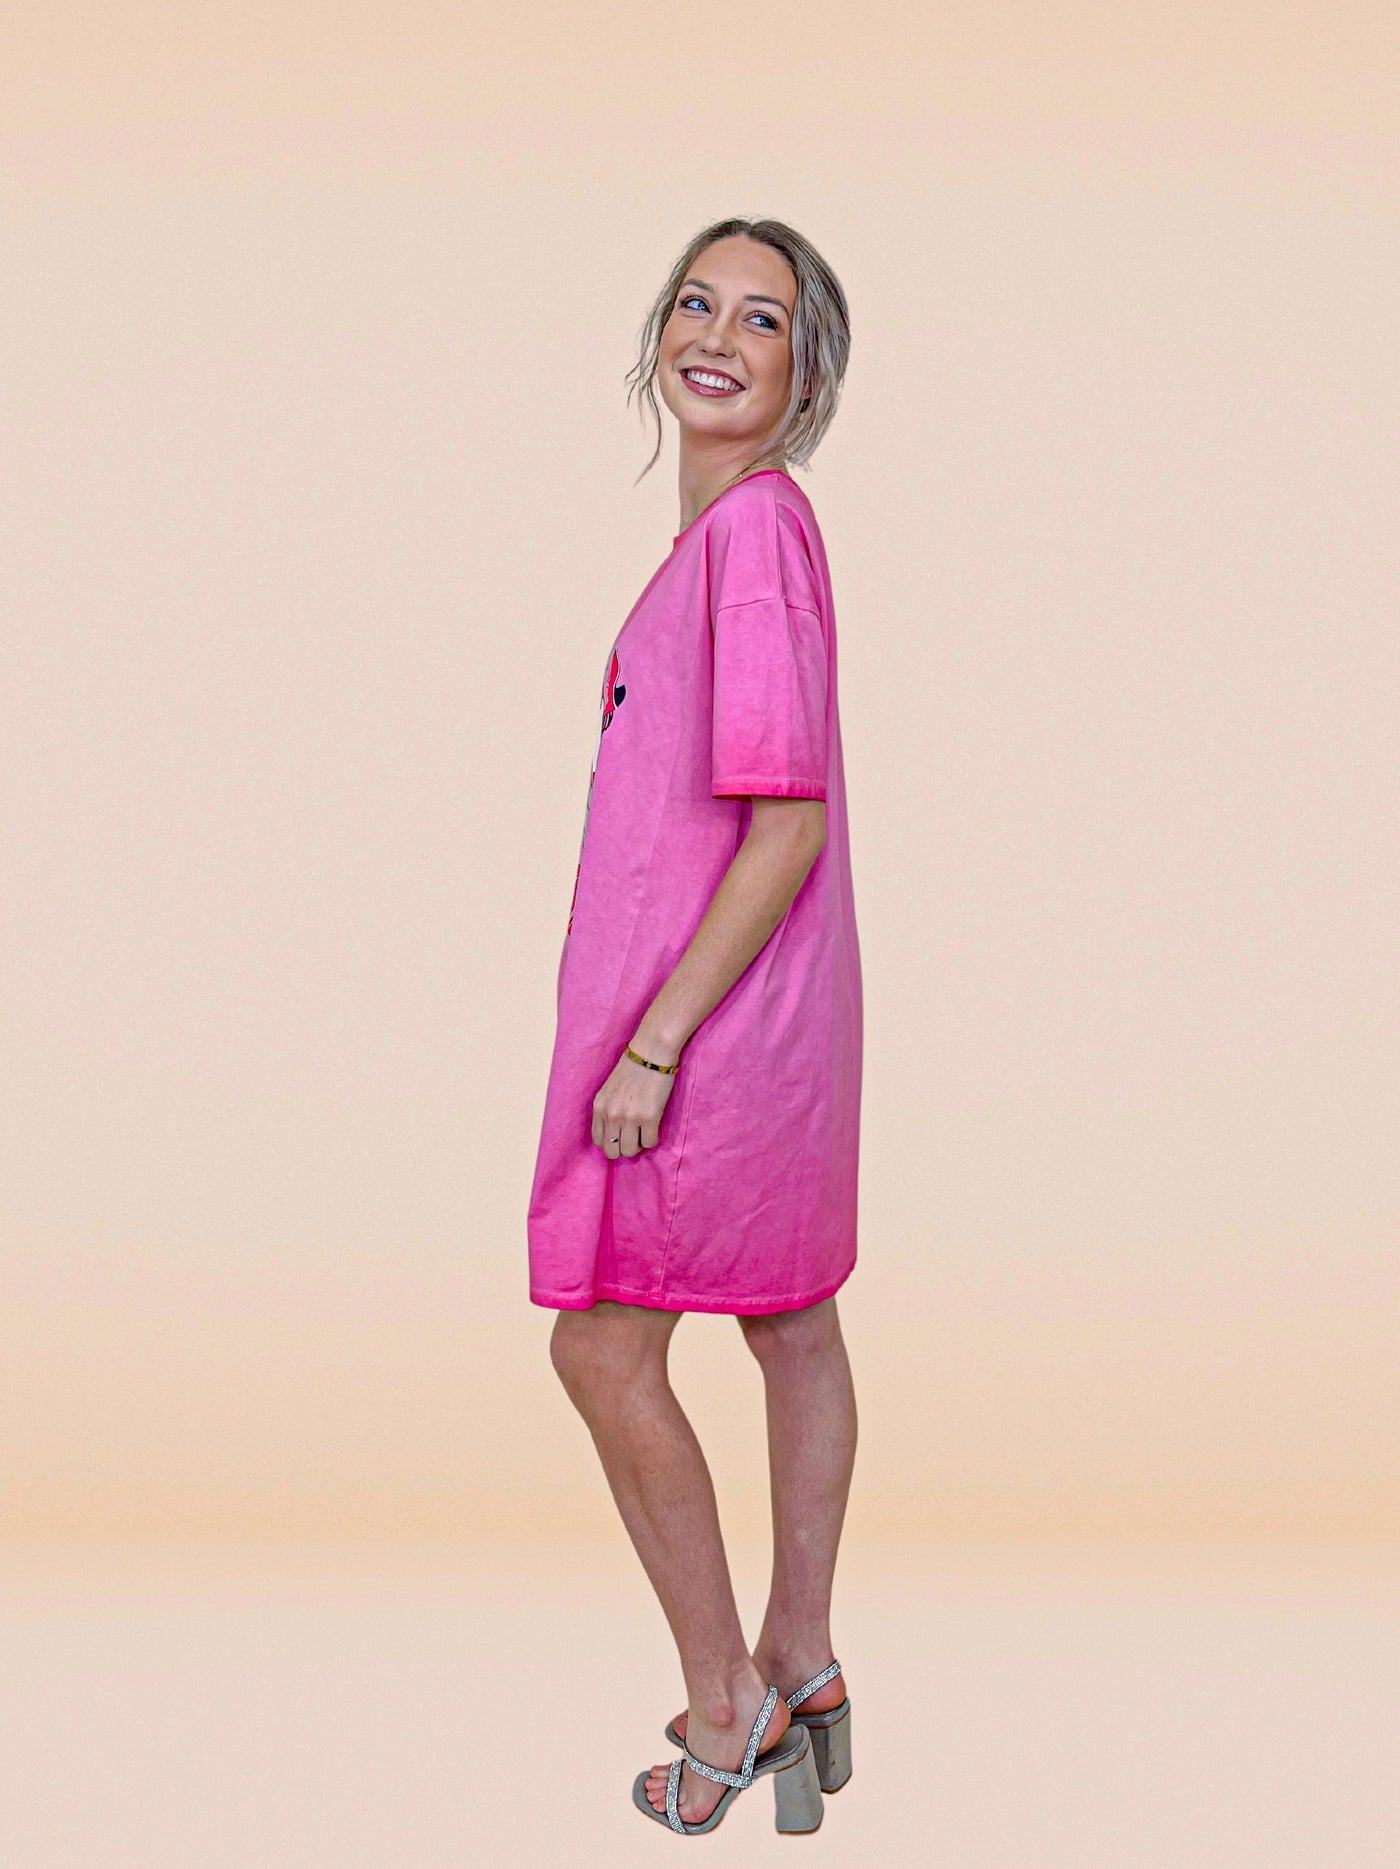 Blame The Champagne on Pink T-Shirt Dress